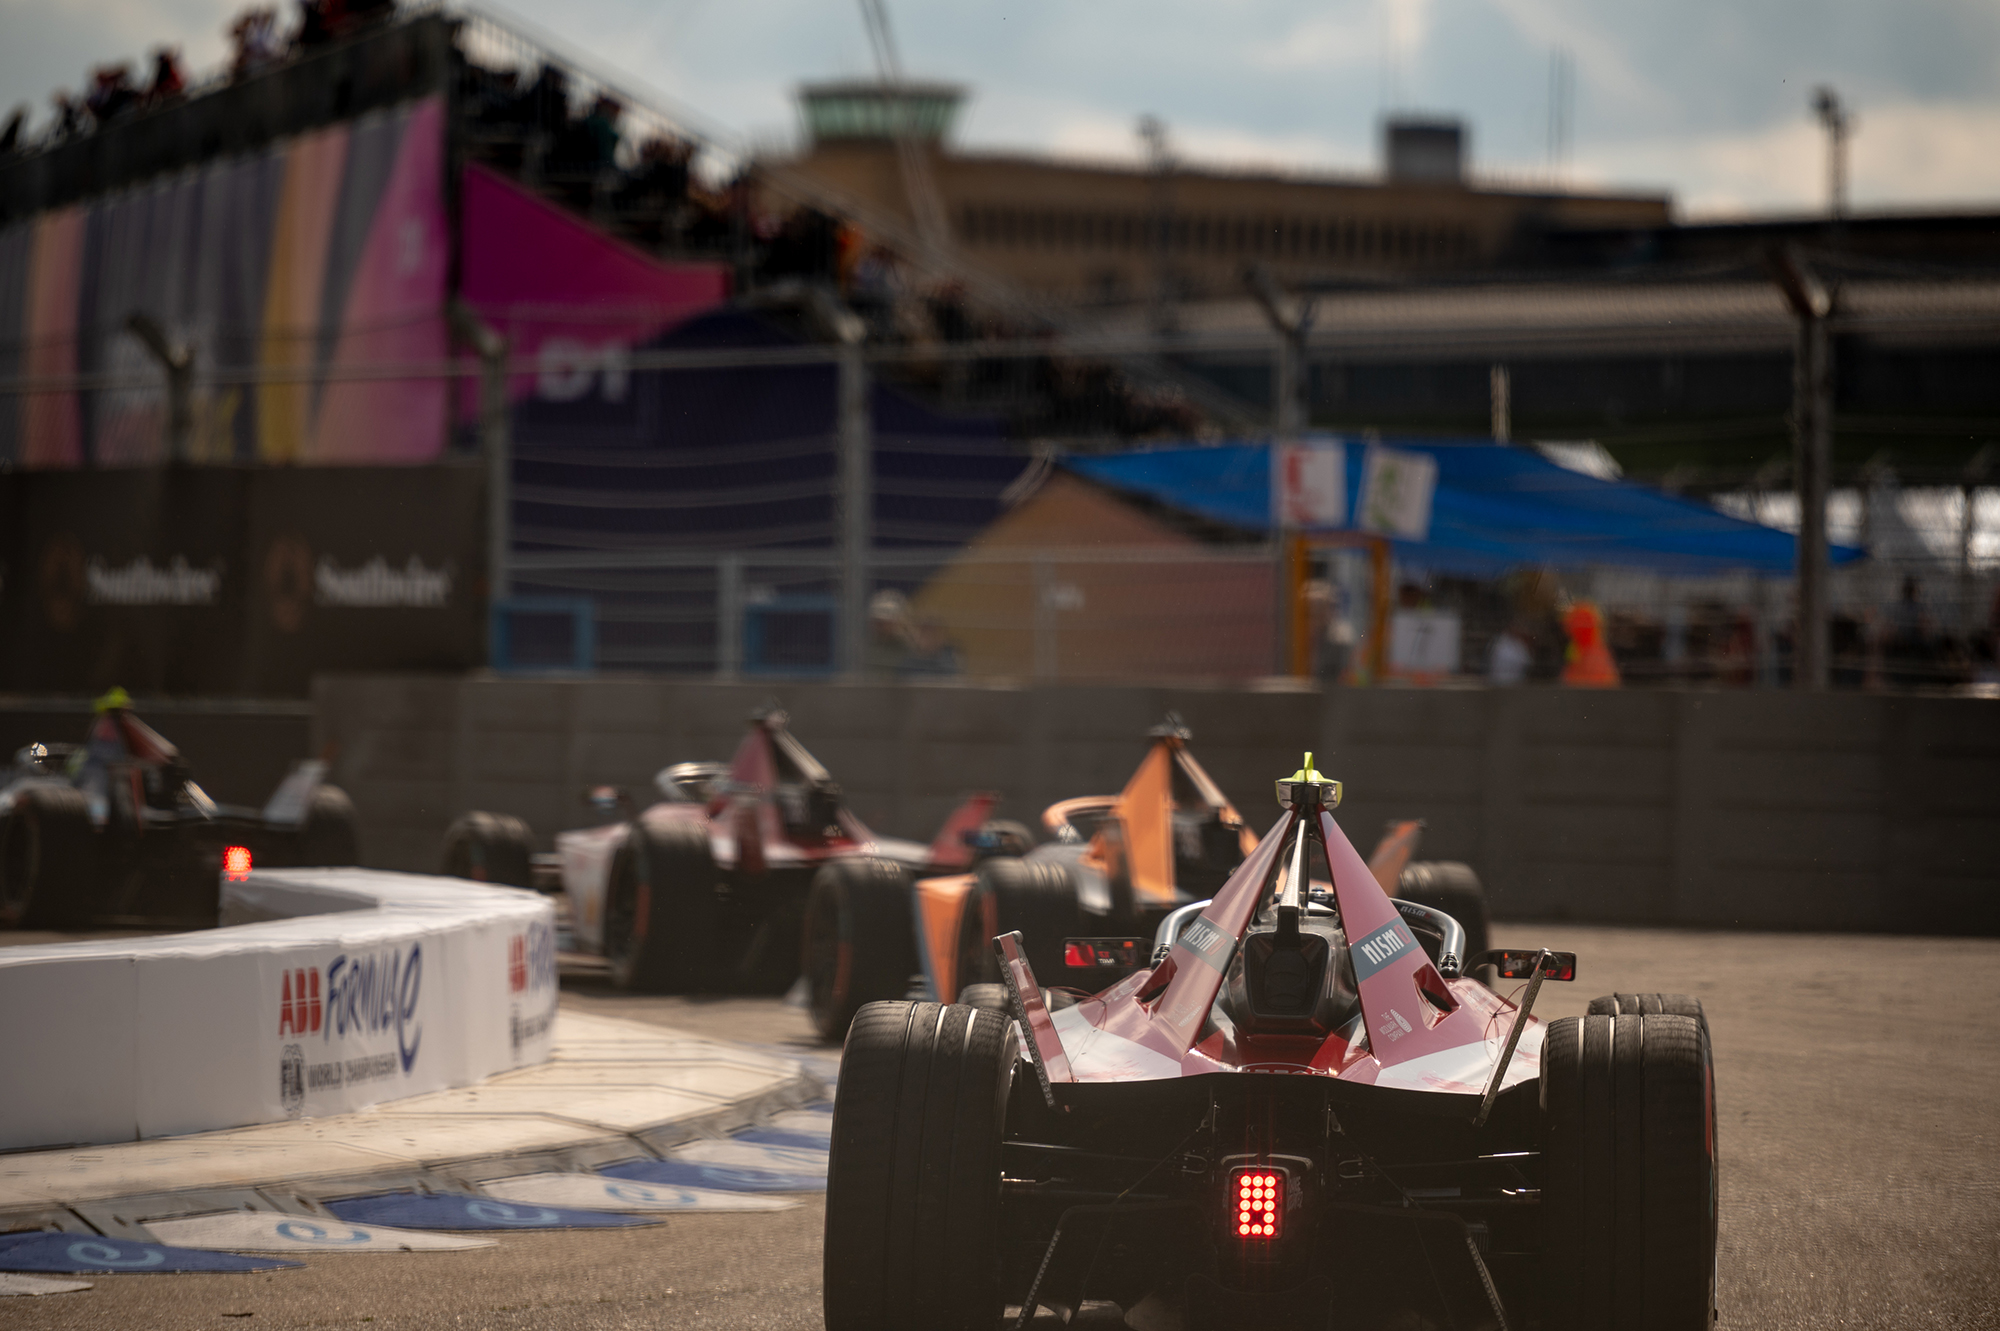 formula e introduces new traction control investigation system